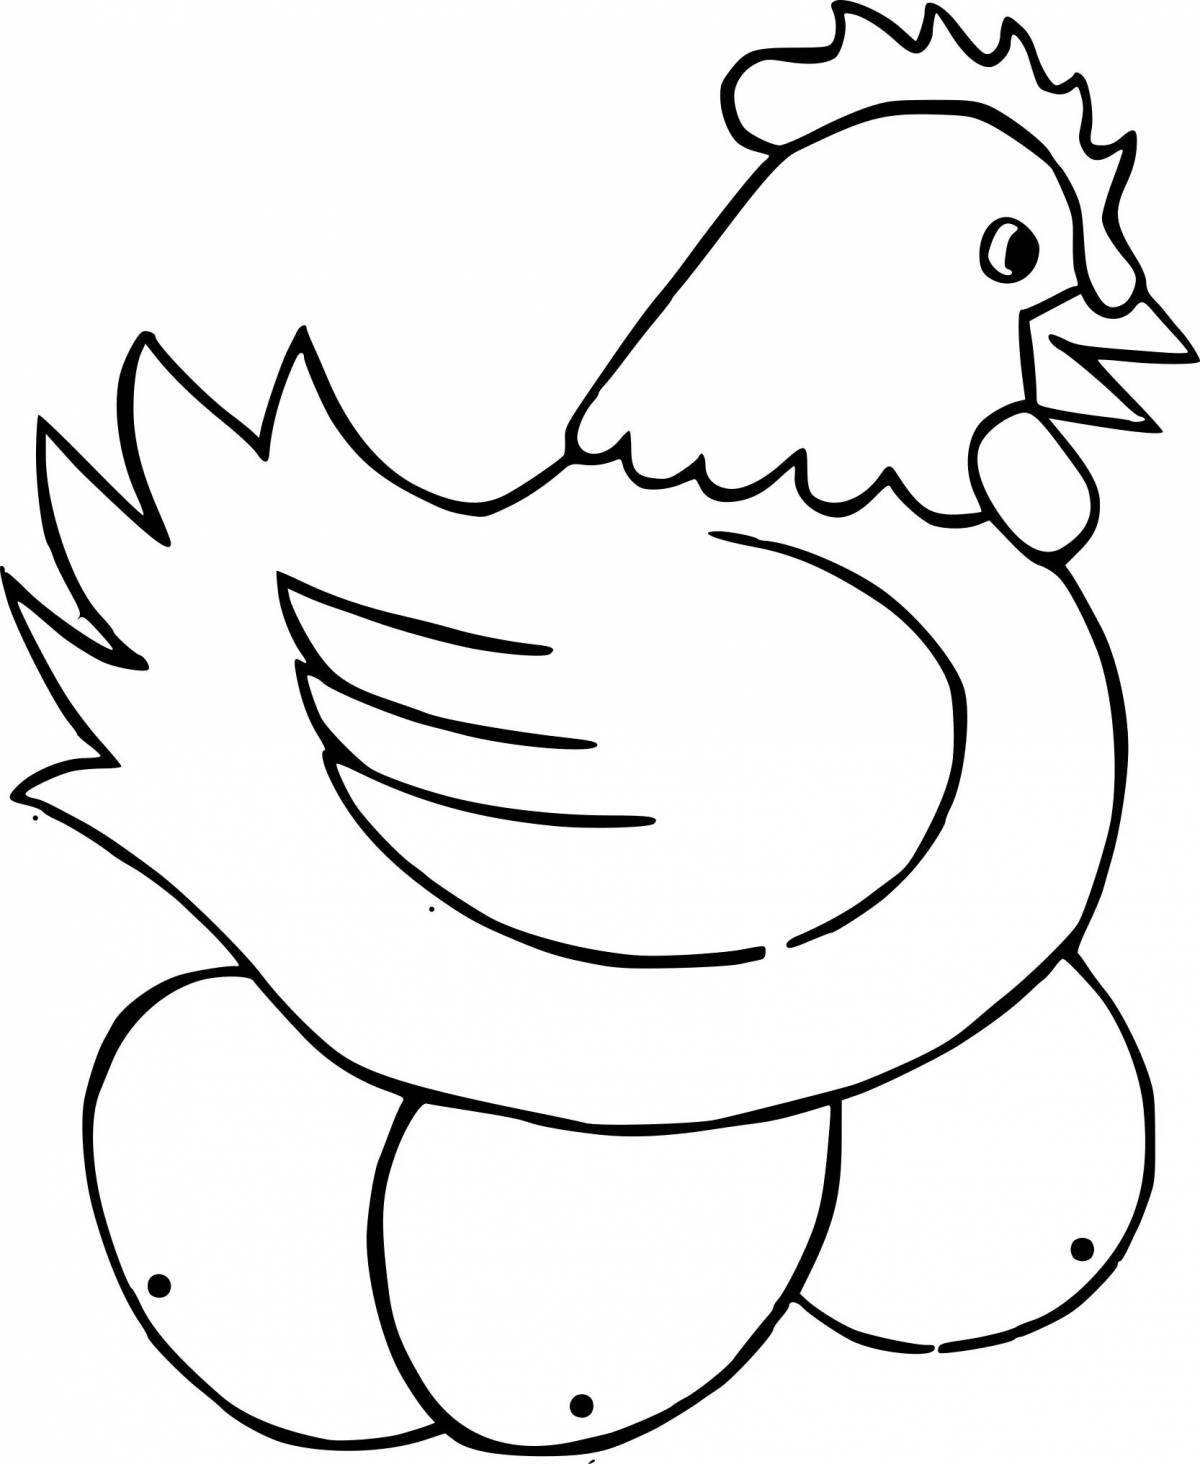 Exciting chick coloring page for 2-3 year old babies